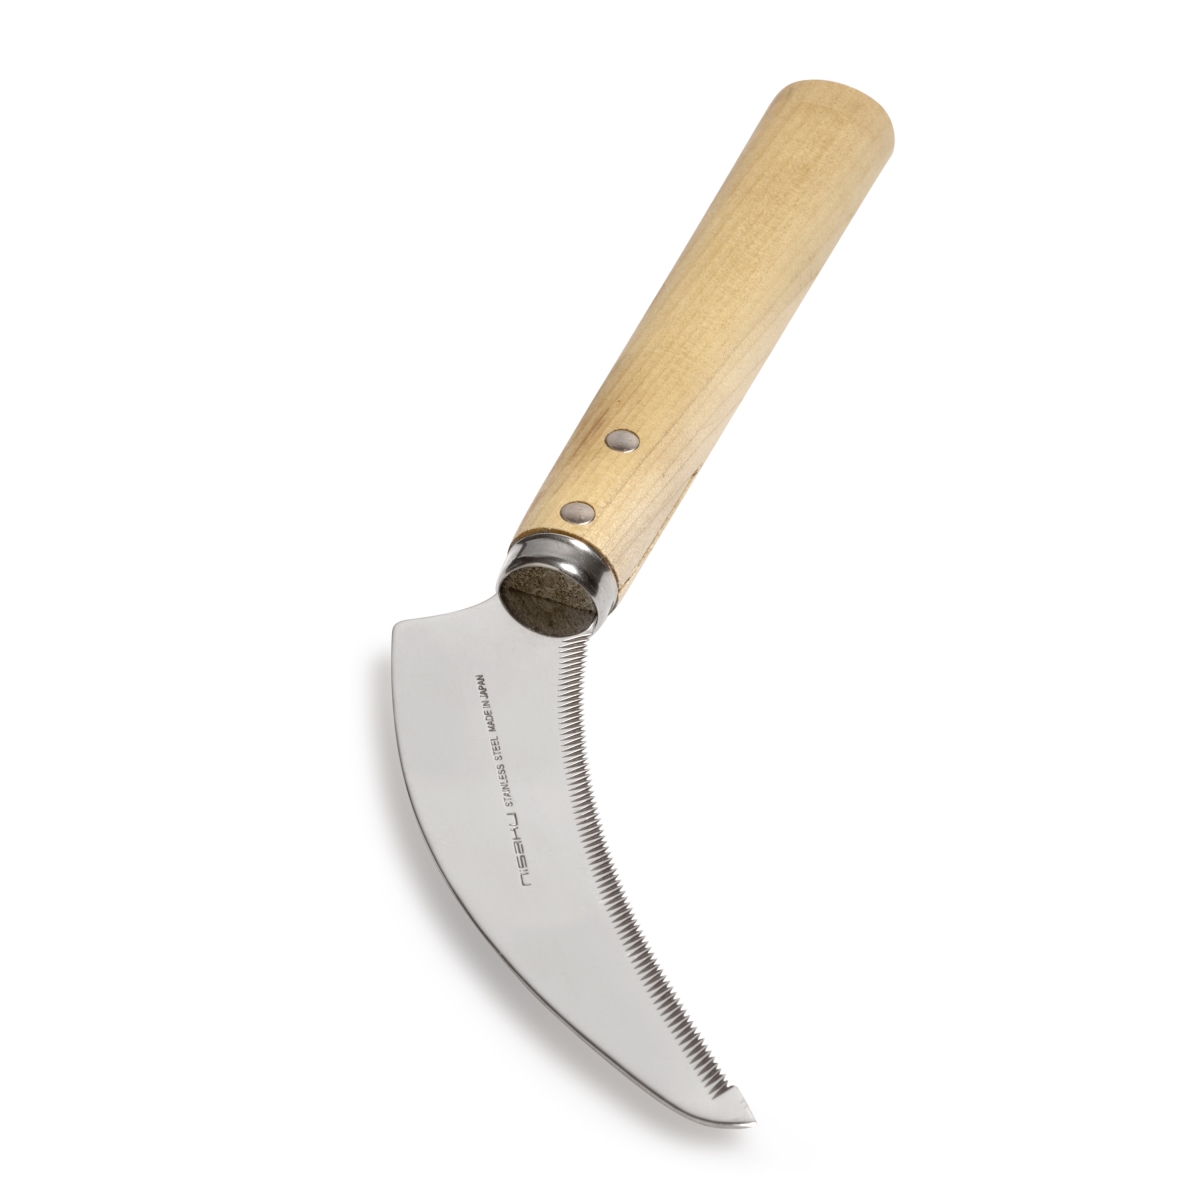 8 In. Blade Mini Cut Kama Stainless Steel Saw Tooth Sickle